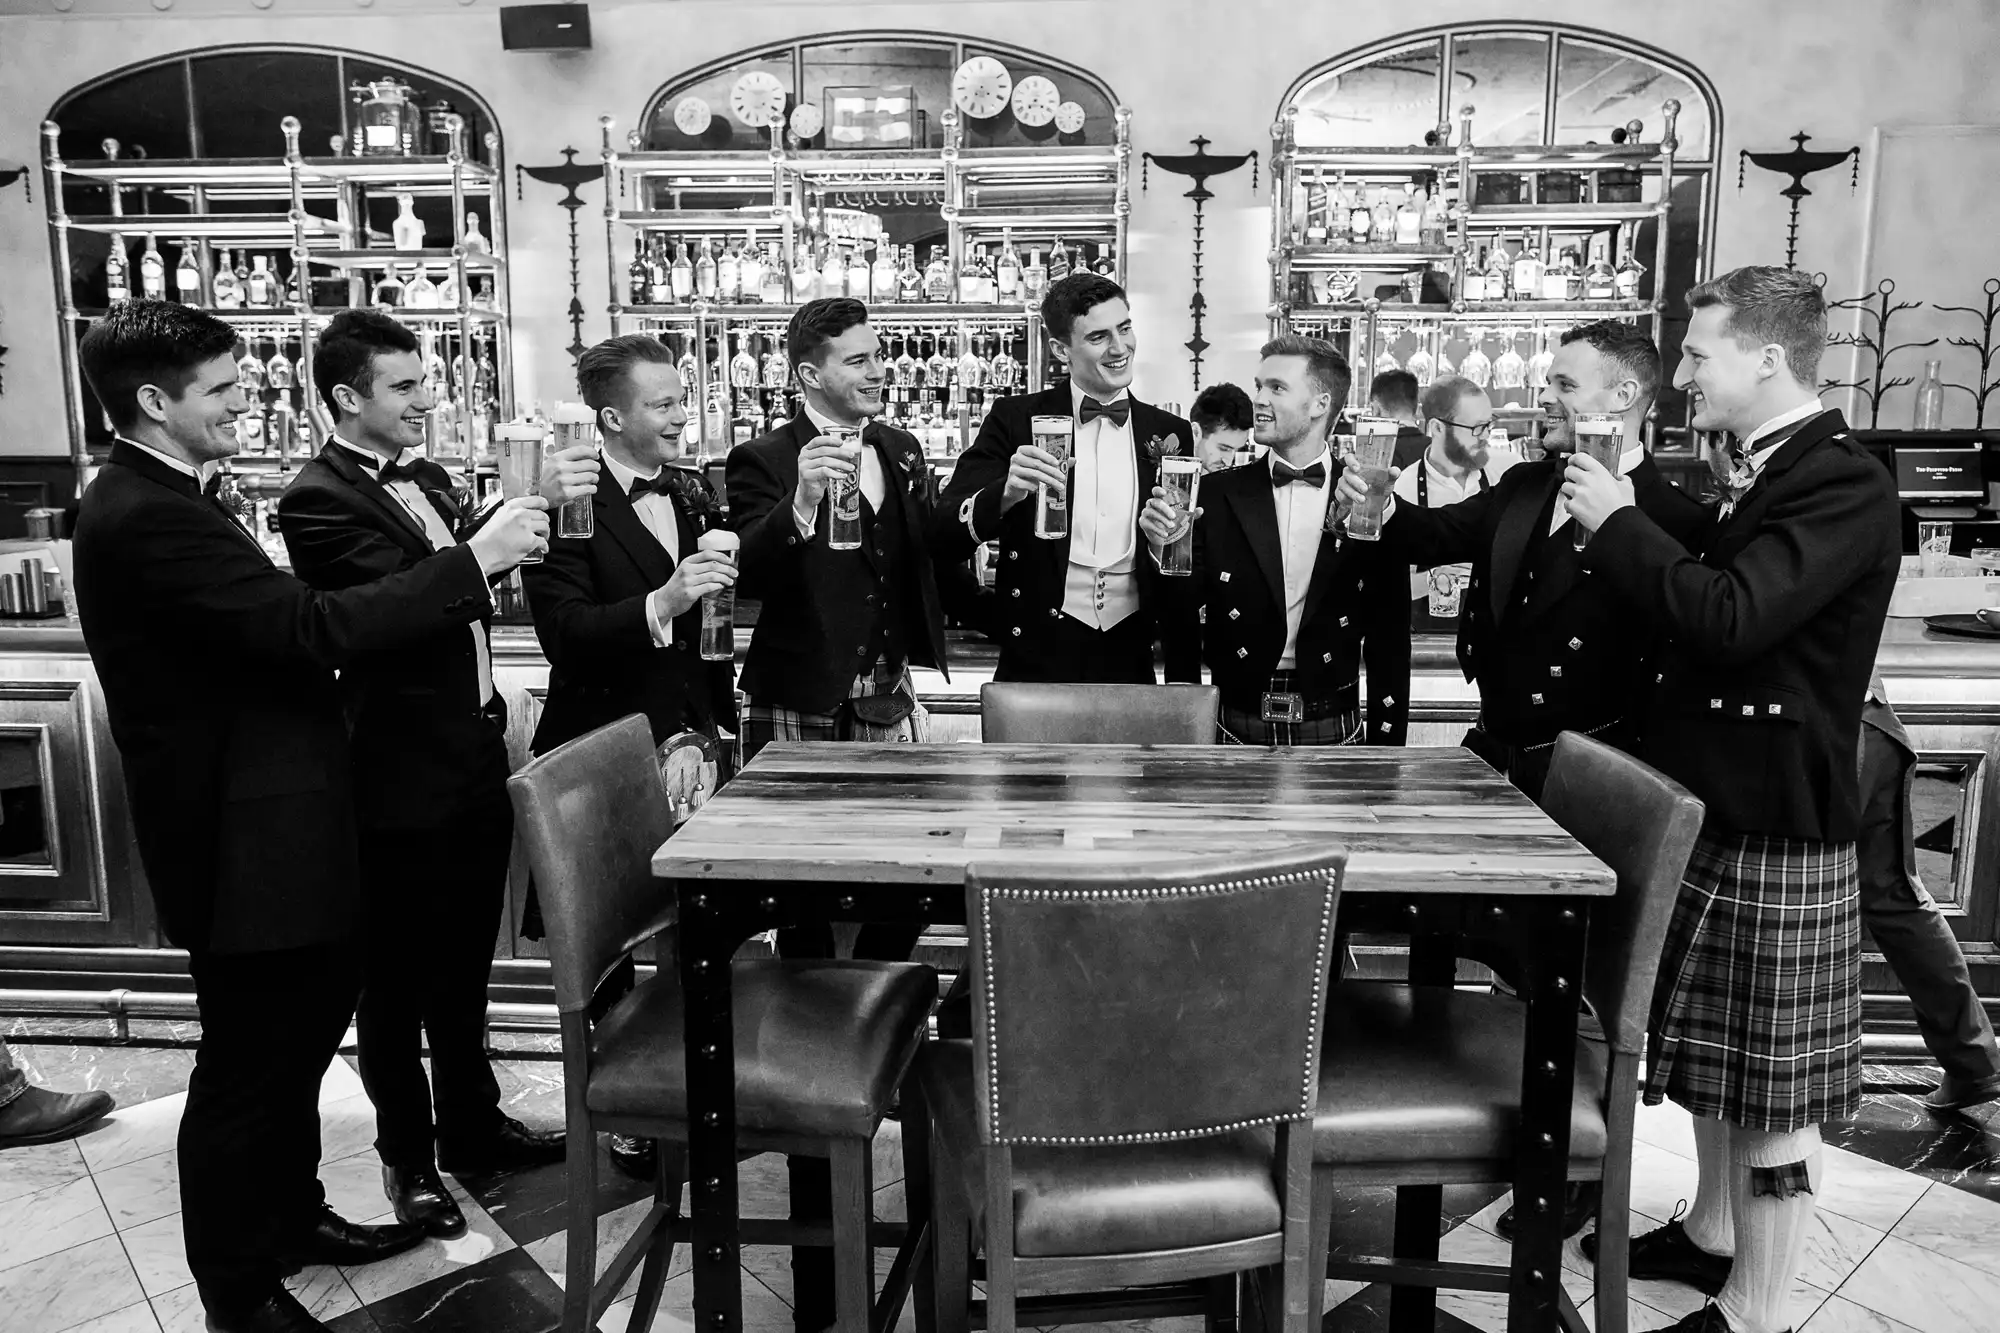 A group of men in formal attire, some wearing kilts, stand around a high table in a bar, raising their glasses in a celebratory toast.